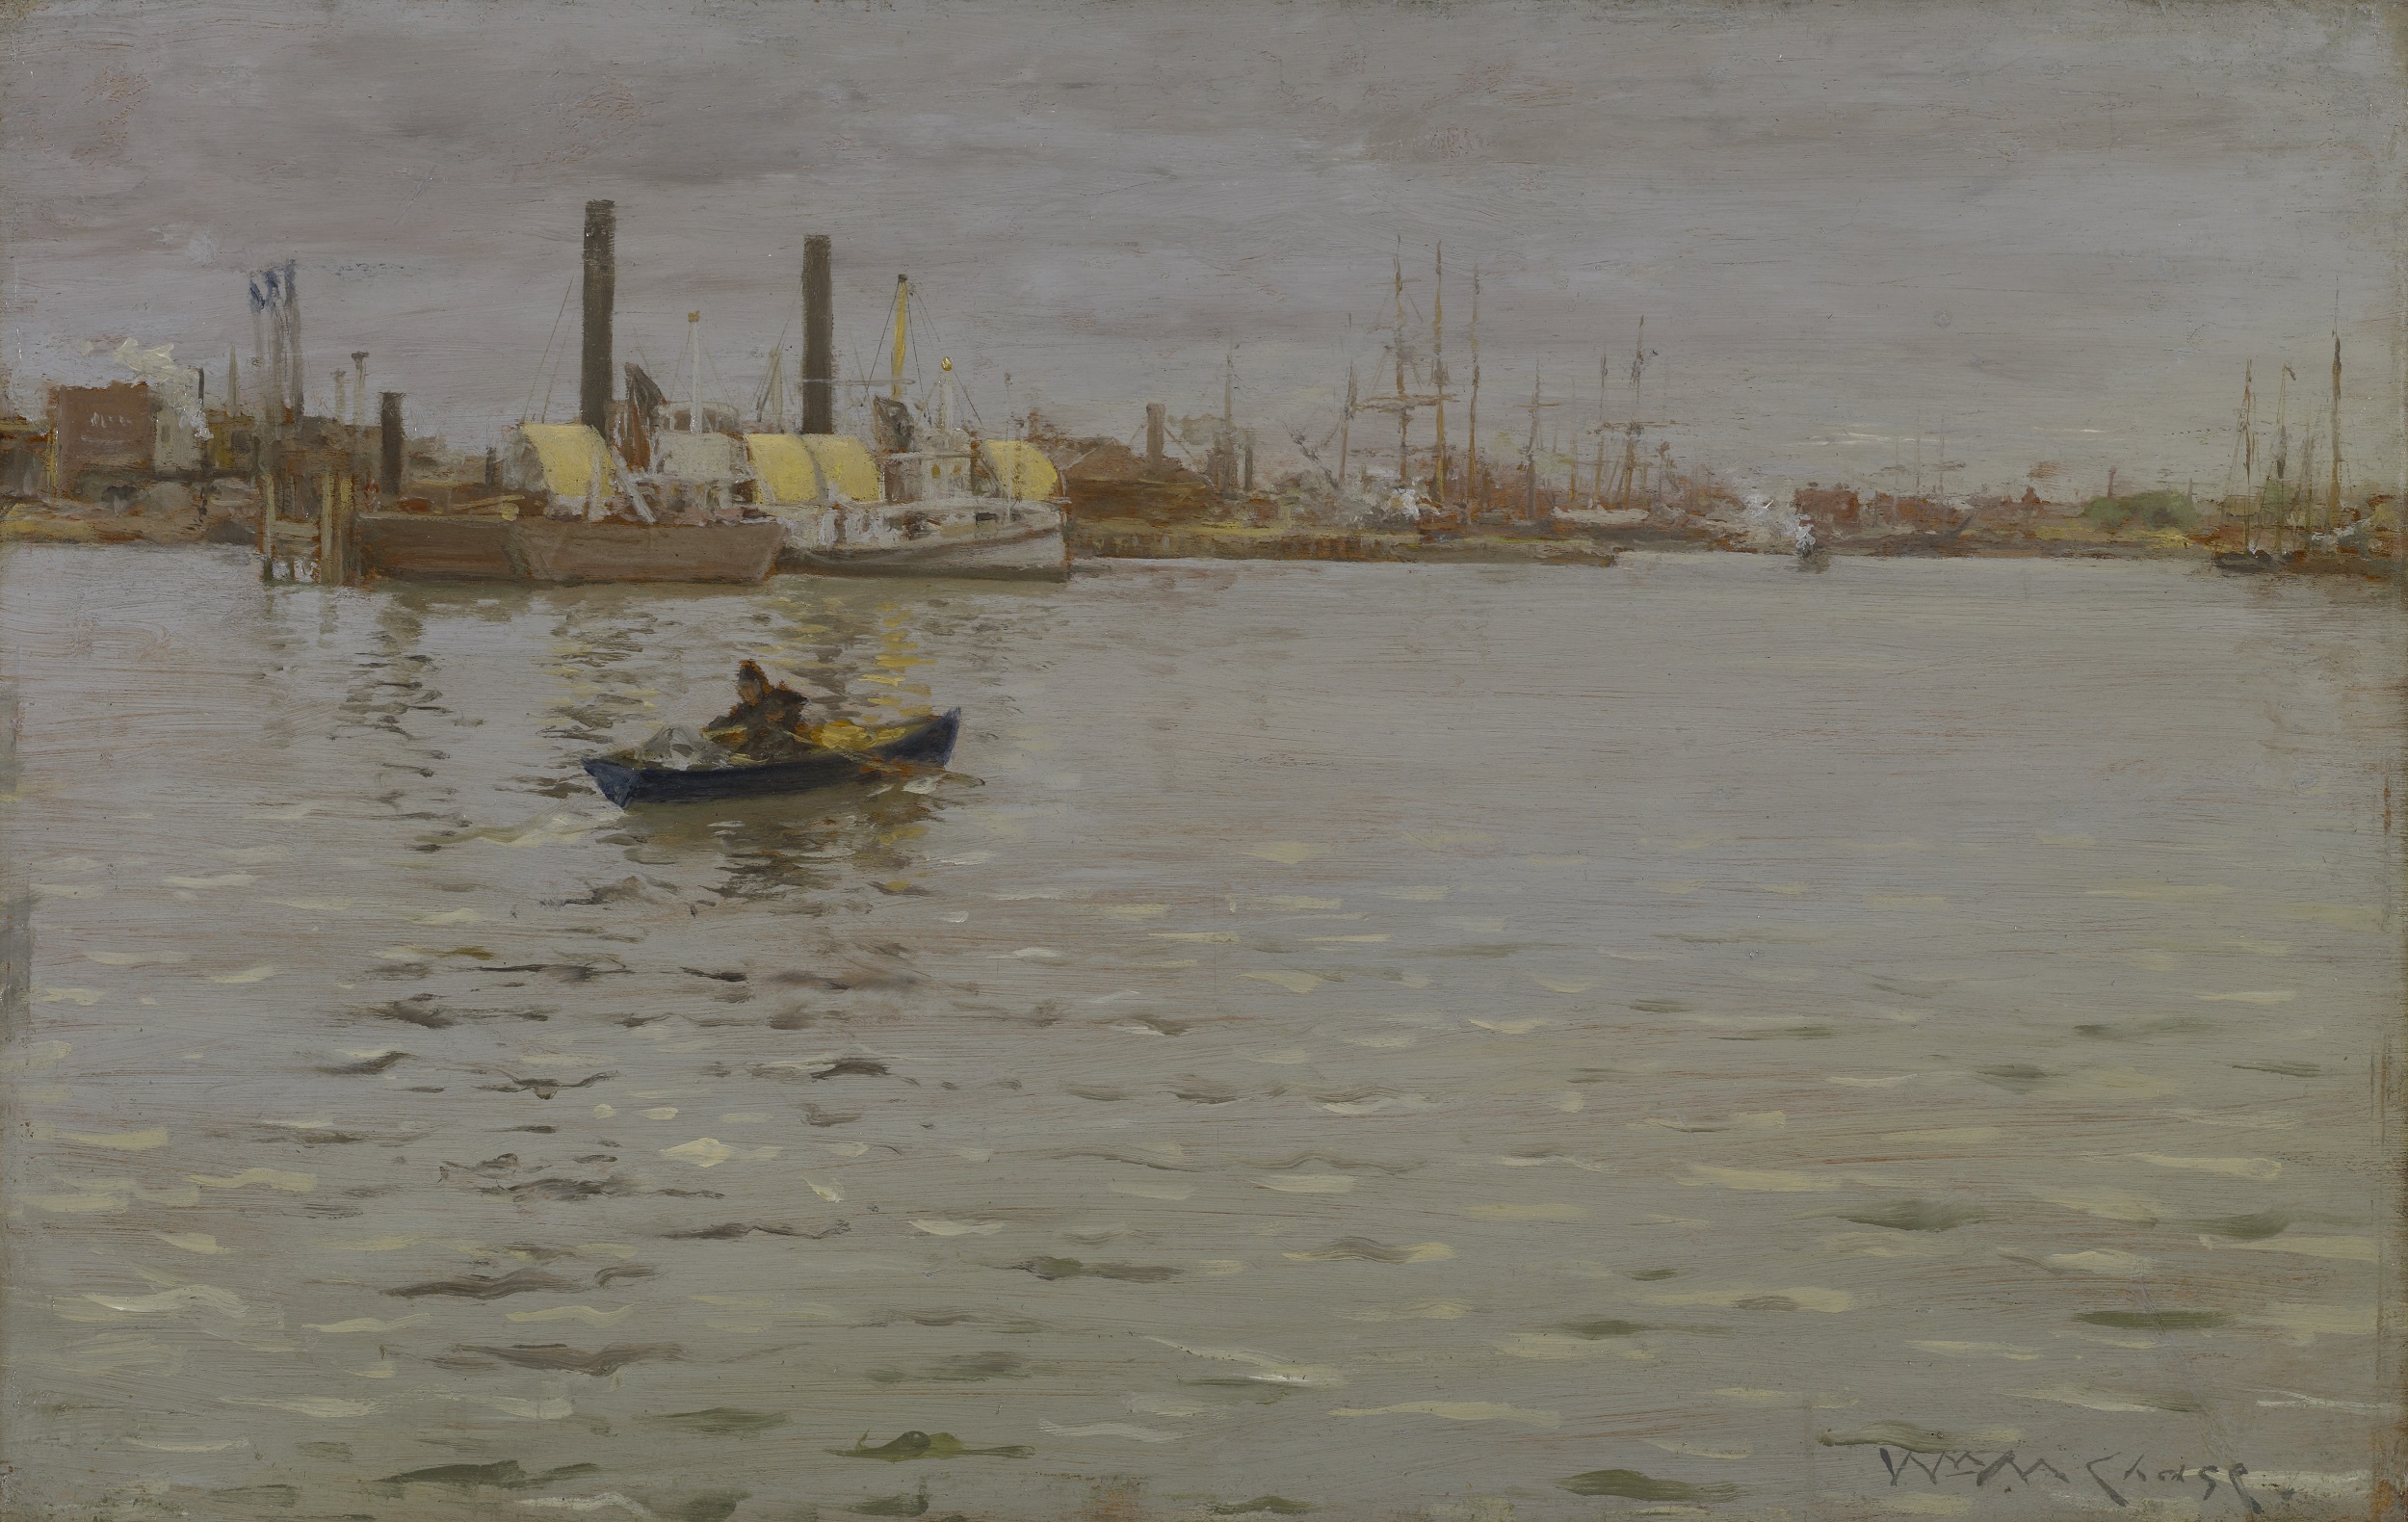 Impressionistic oil painting of an industrial city seen across a body of water. The silhouette of a figure in a rowboat is visible center left.